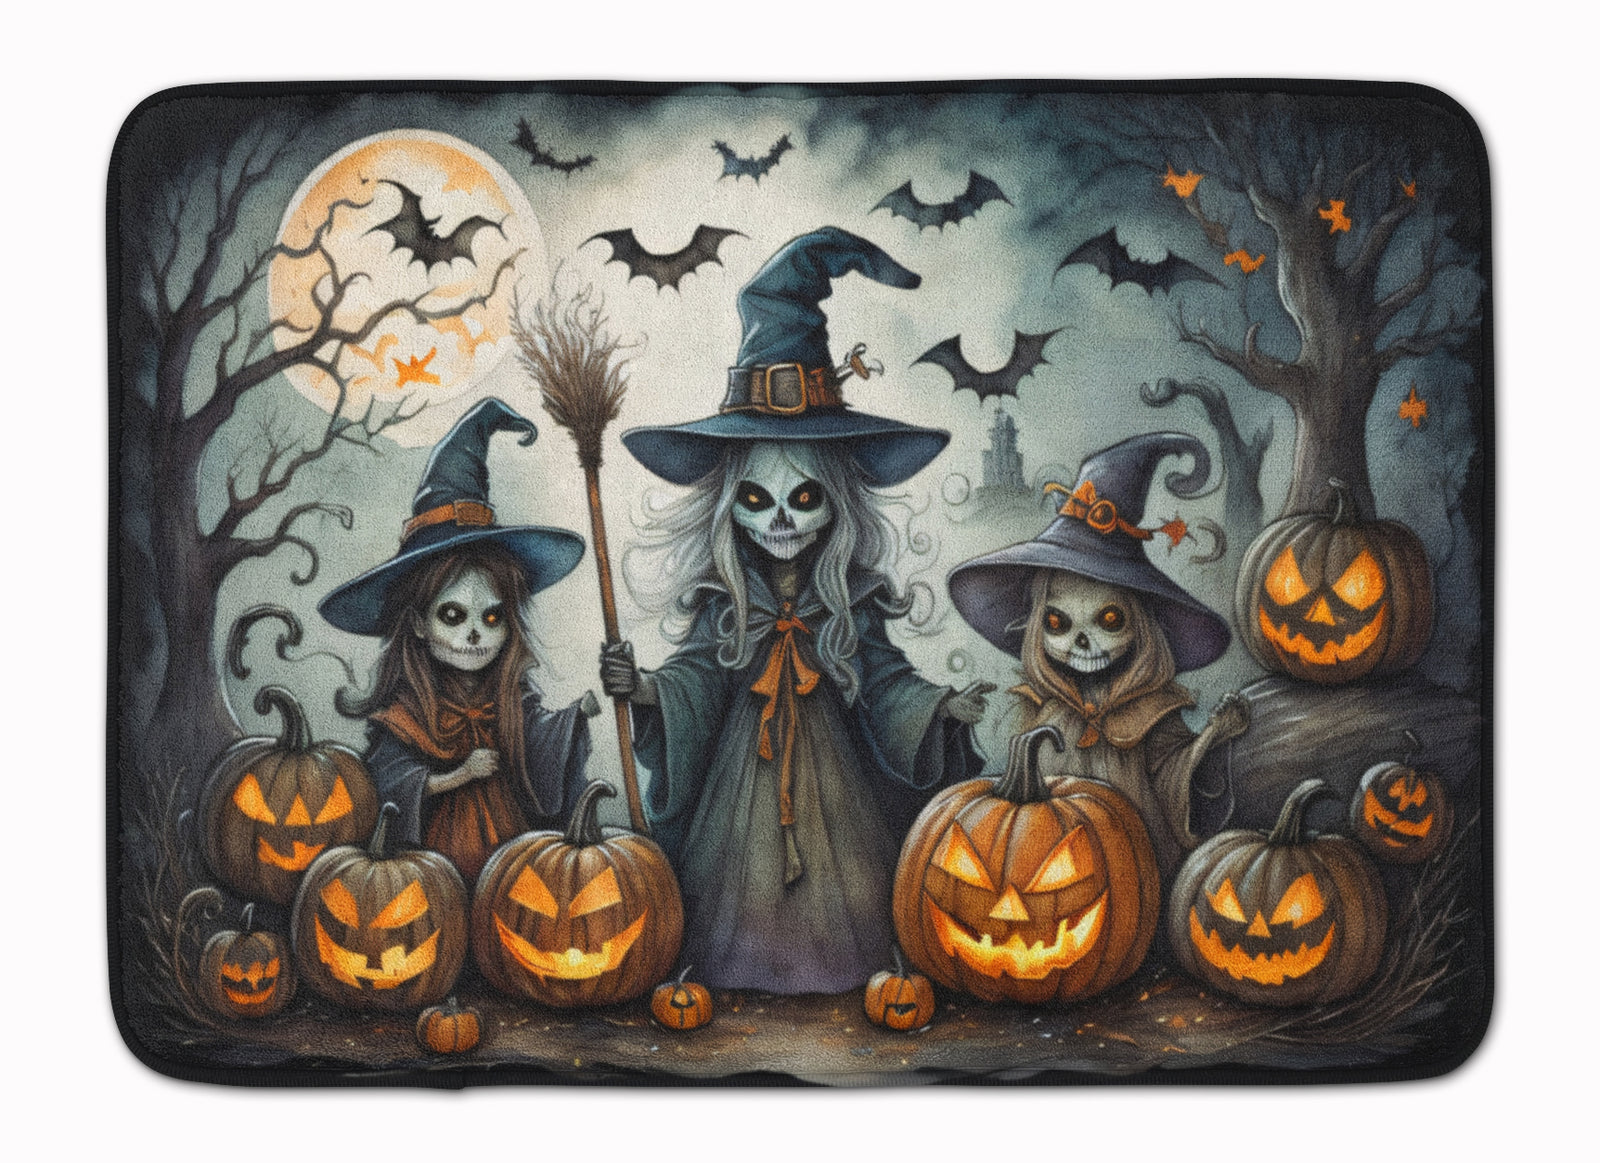 Buy this Witches Spooky Halloween Memory Foam Kitchen Mat